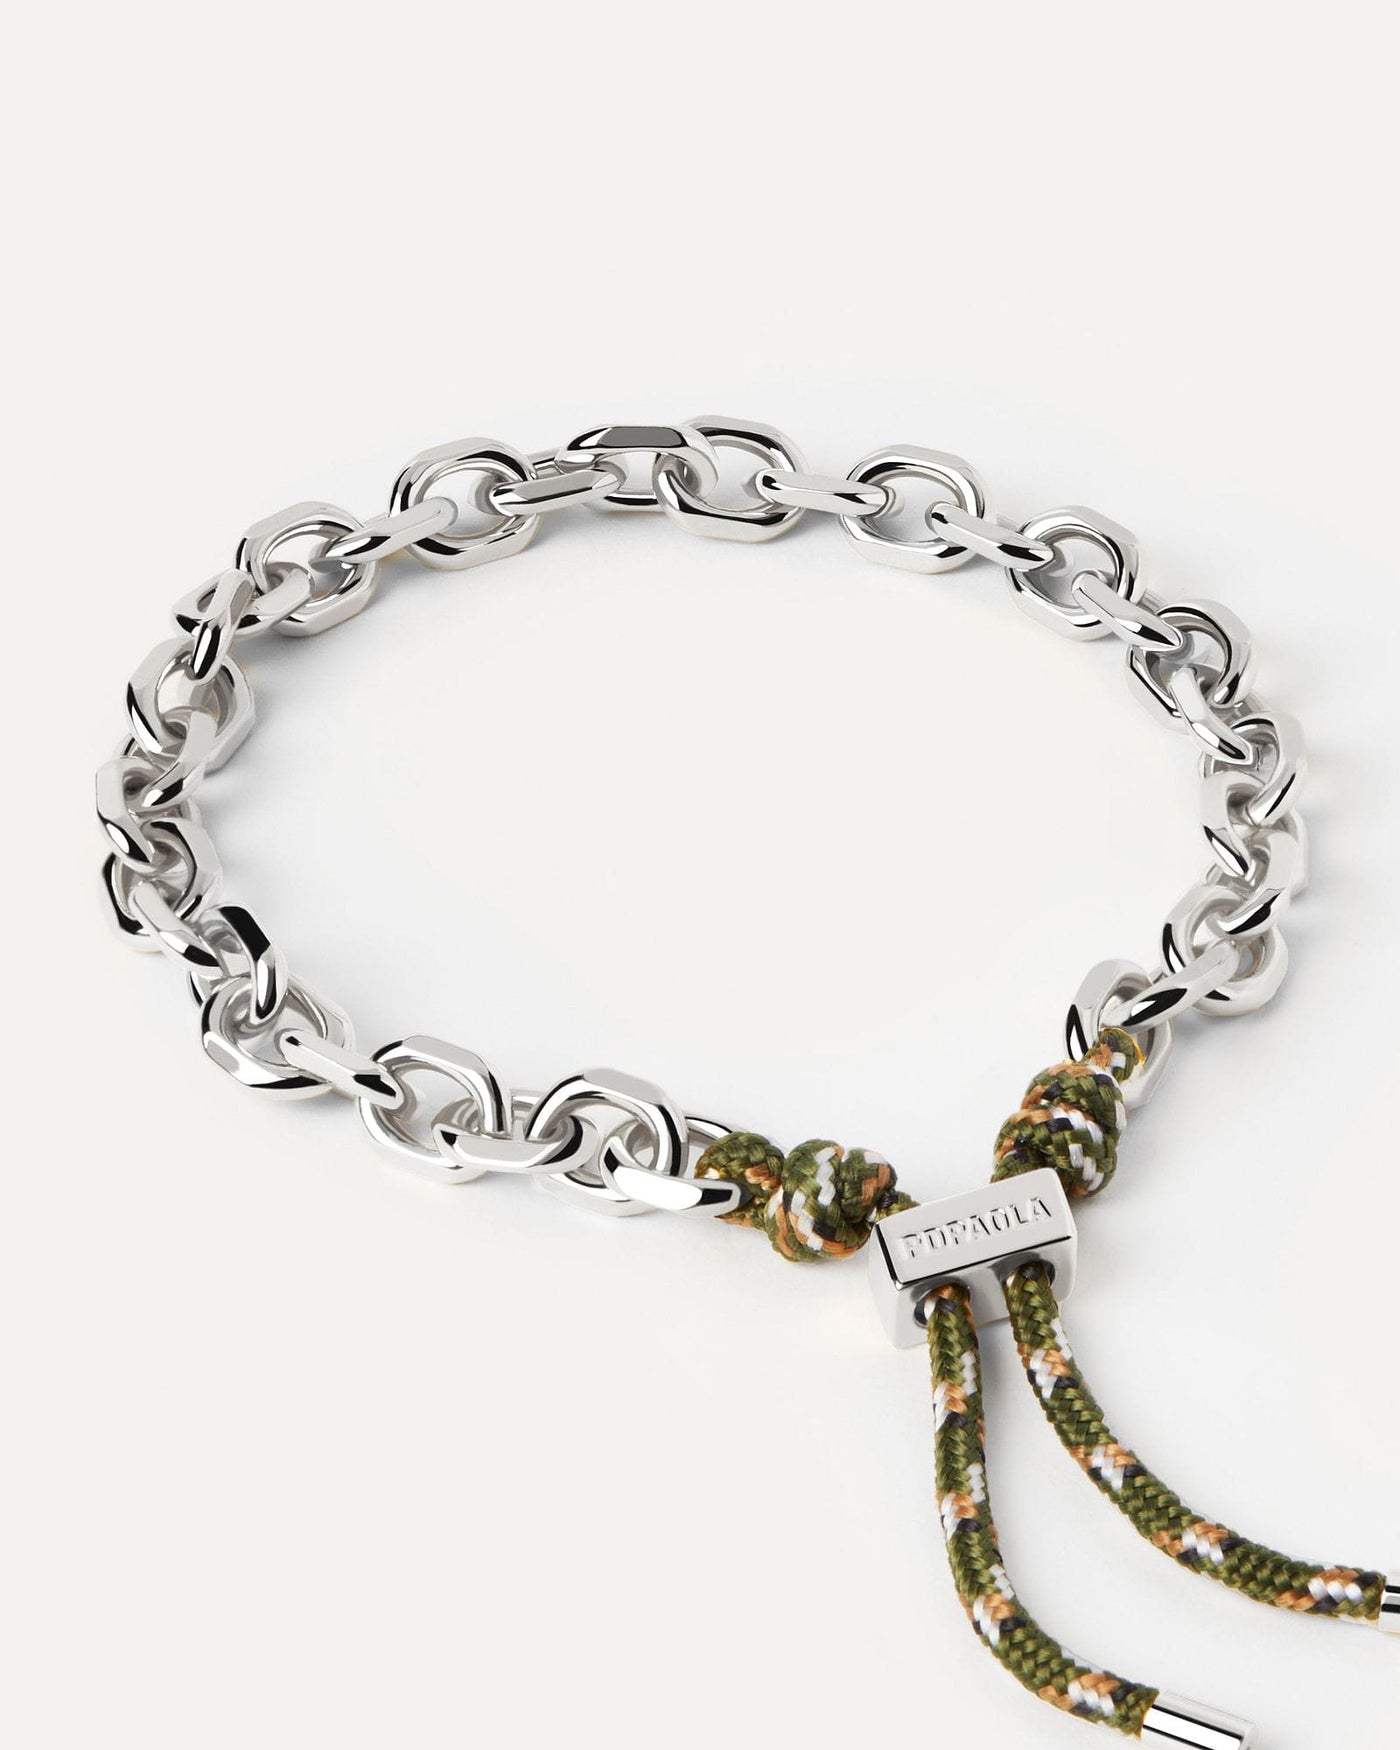 2024 Selection | Cottage Essential Rope and Chain Silver Bracelet. Silver chain bracelet with an orange rope adjustable sliding clasp. Get the latest arrival from PDPAOLA. Place your order safely and get this Best Seller. Free Shipping.